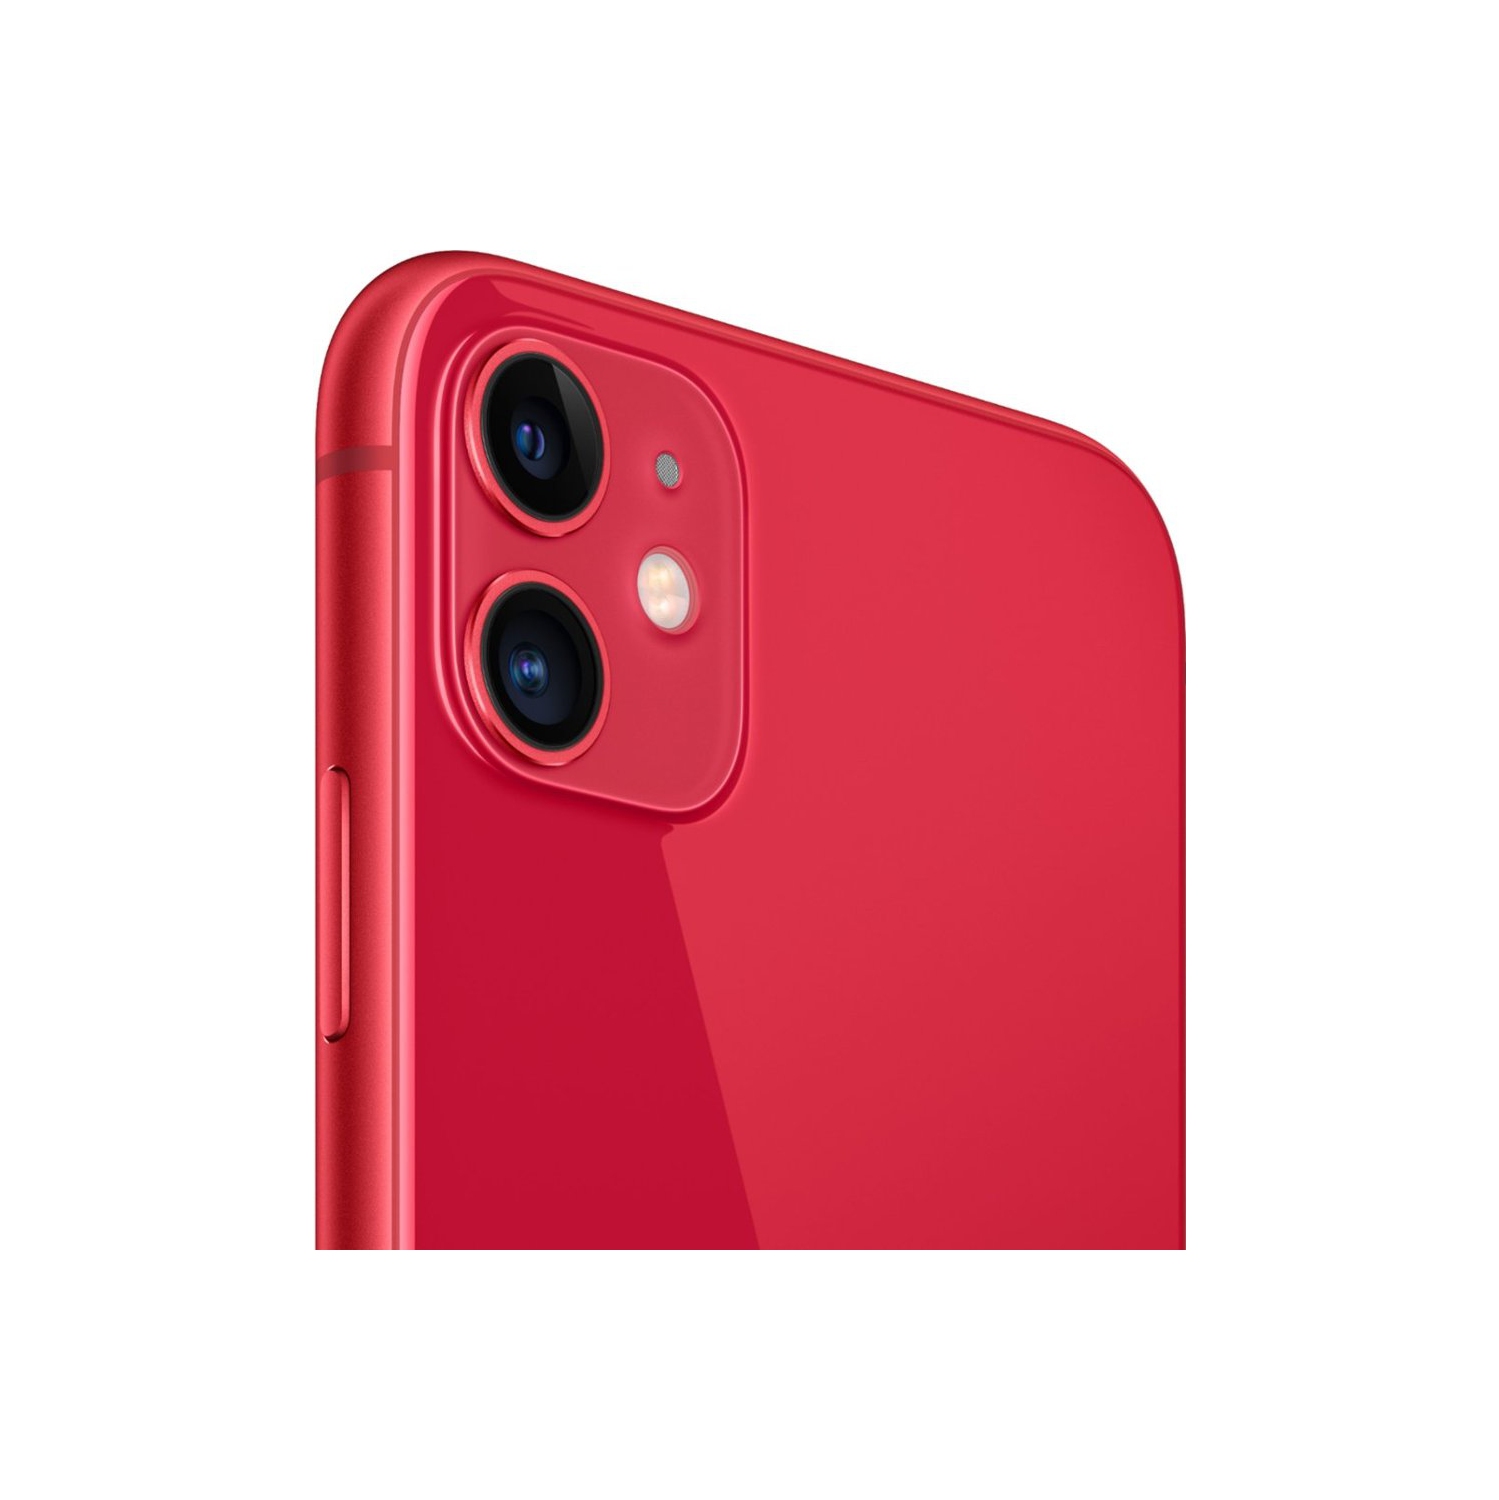 Refurbished (Excellent) - Apple iPhone 11 64GB Smartphone - (PRODUCT)RED -  Unlocked - Certified Refurbished